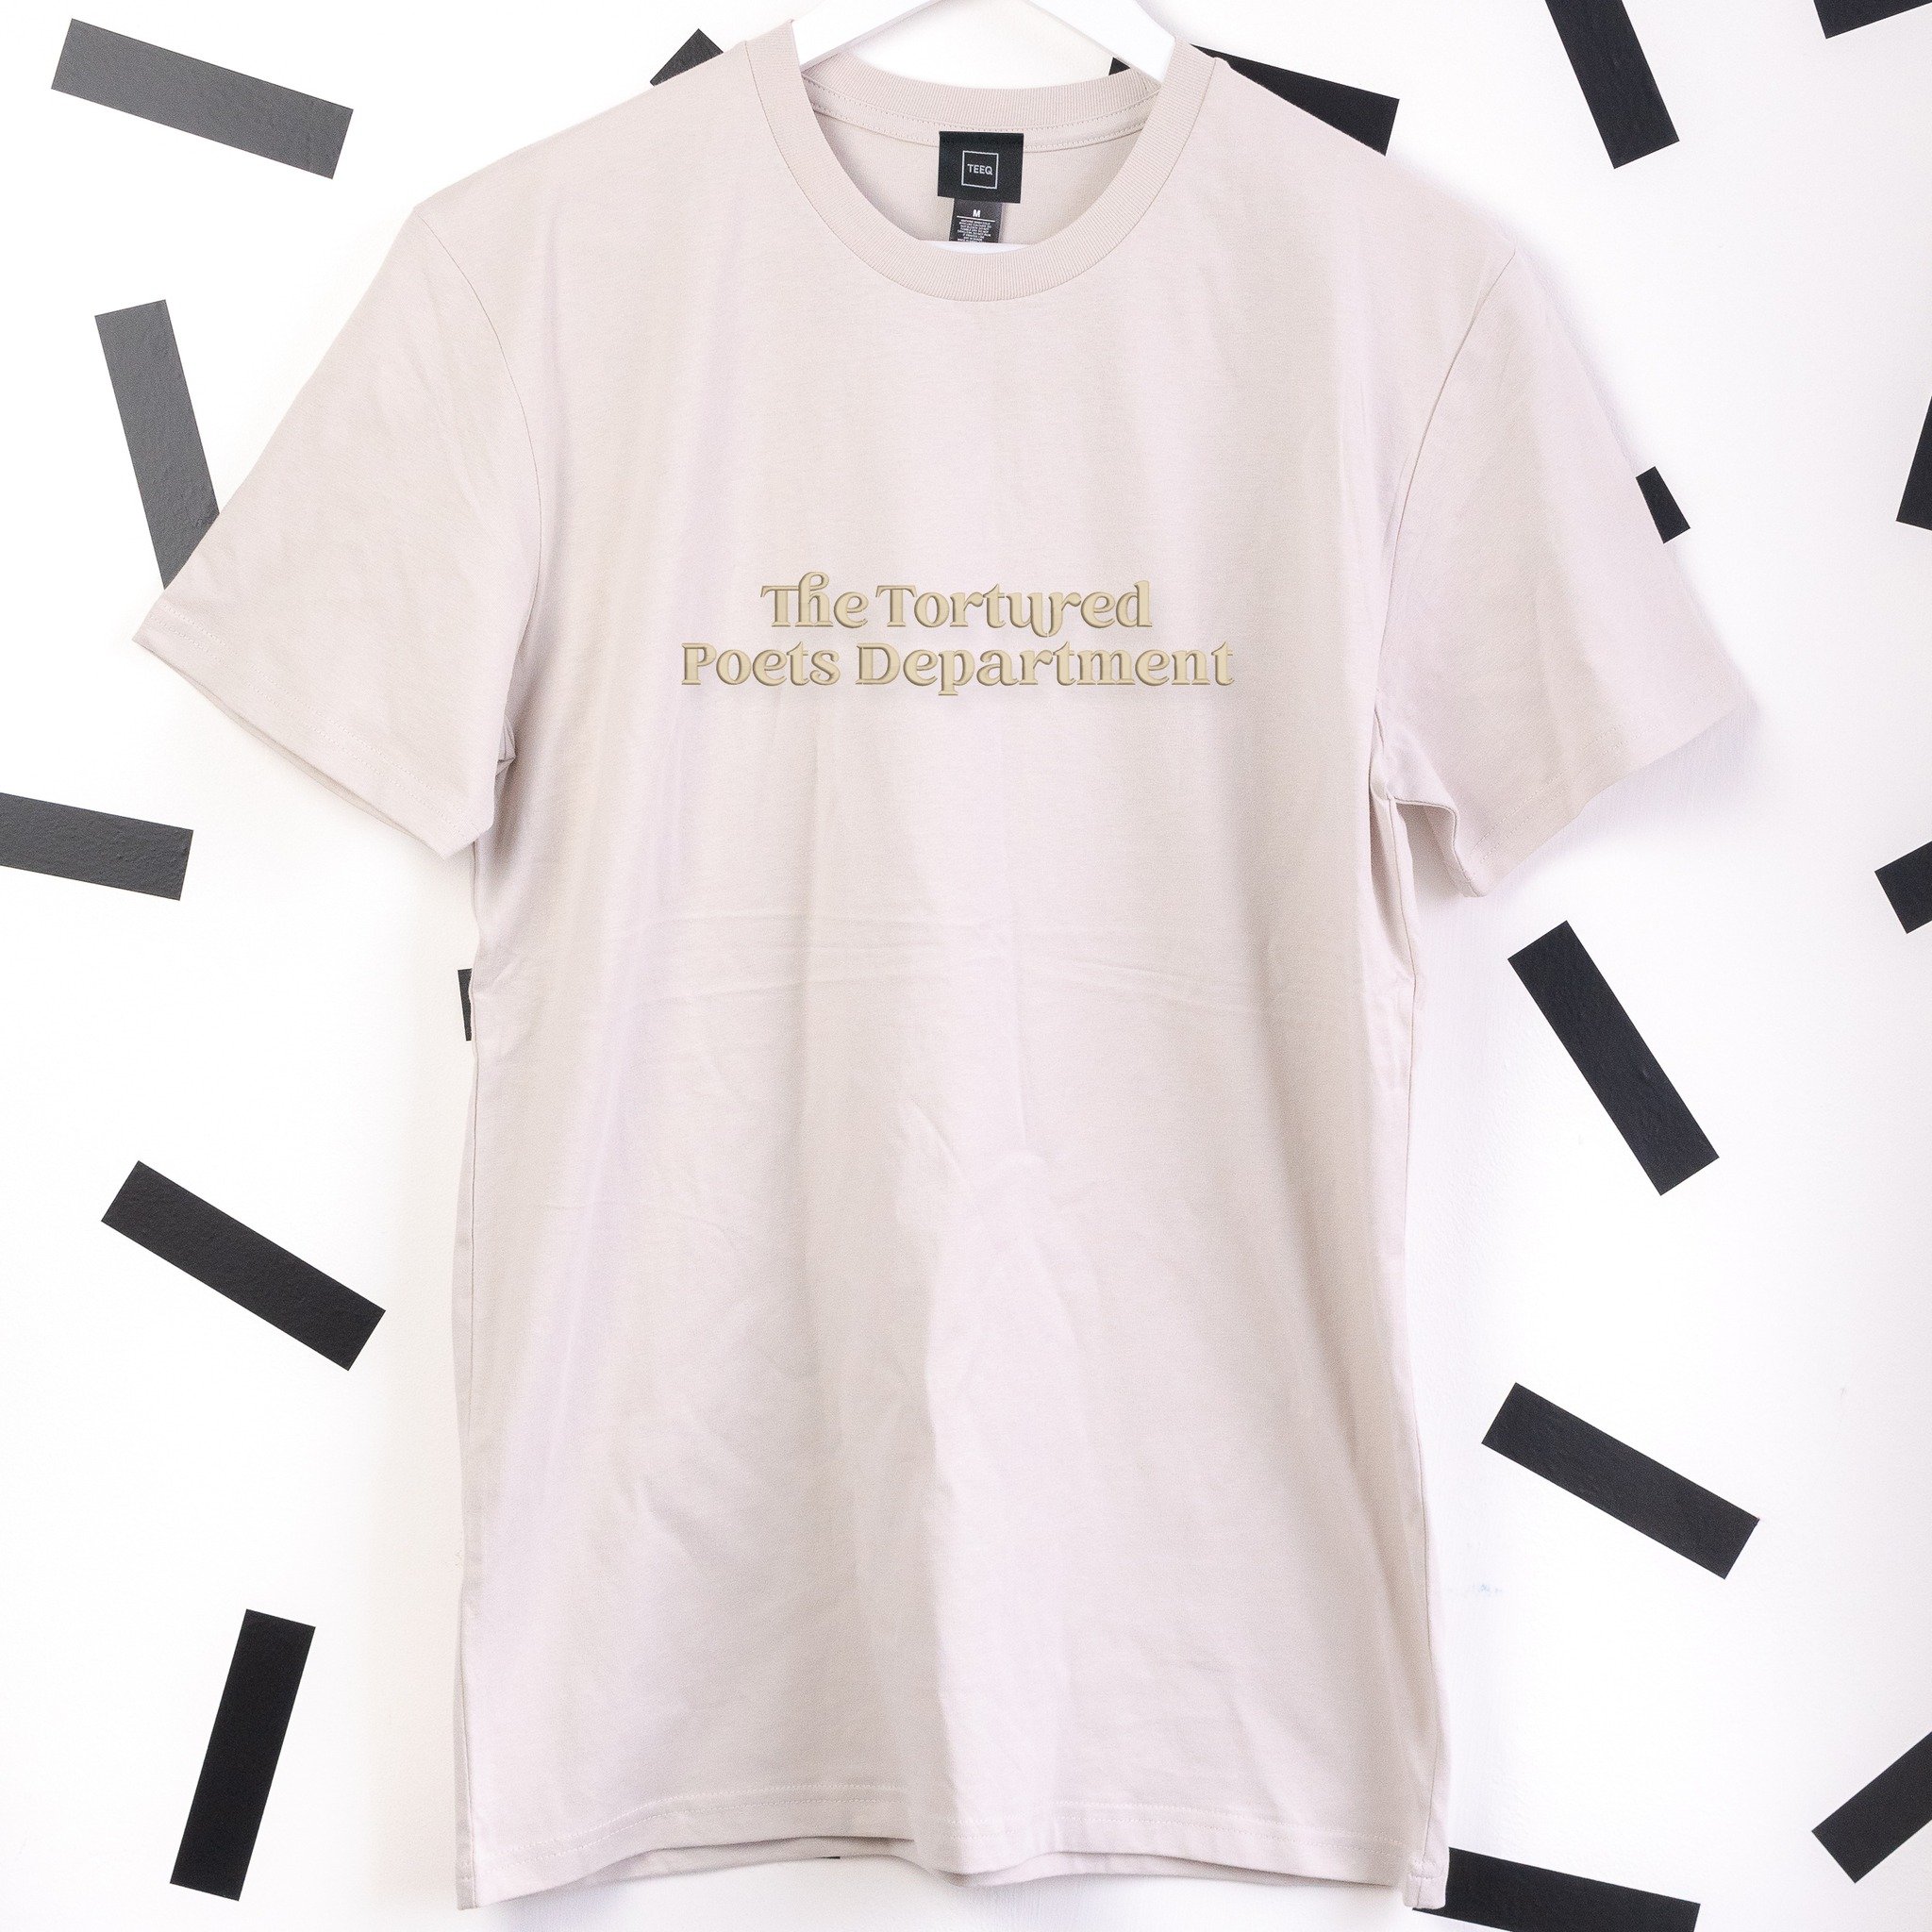 I love you, it's ruining my life... 🎶💔

Step into the emotive world of Taylor Swift with our new Tortured Poets Department album inspired tee! Featuring classic songs and poignant lyrics, this bone coloured tee is a must-have to complete your Swift